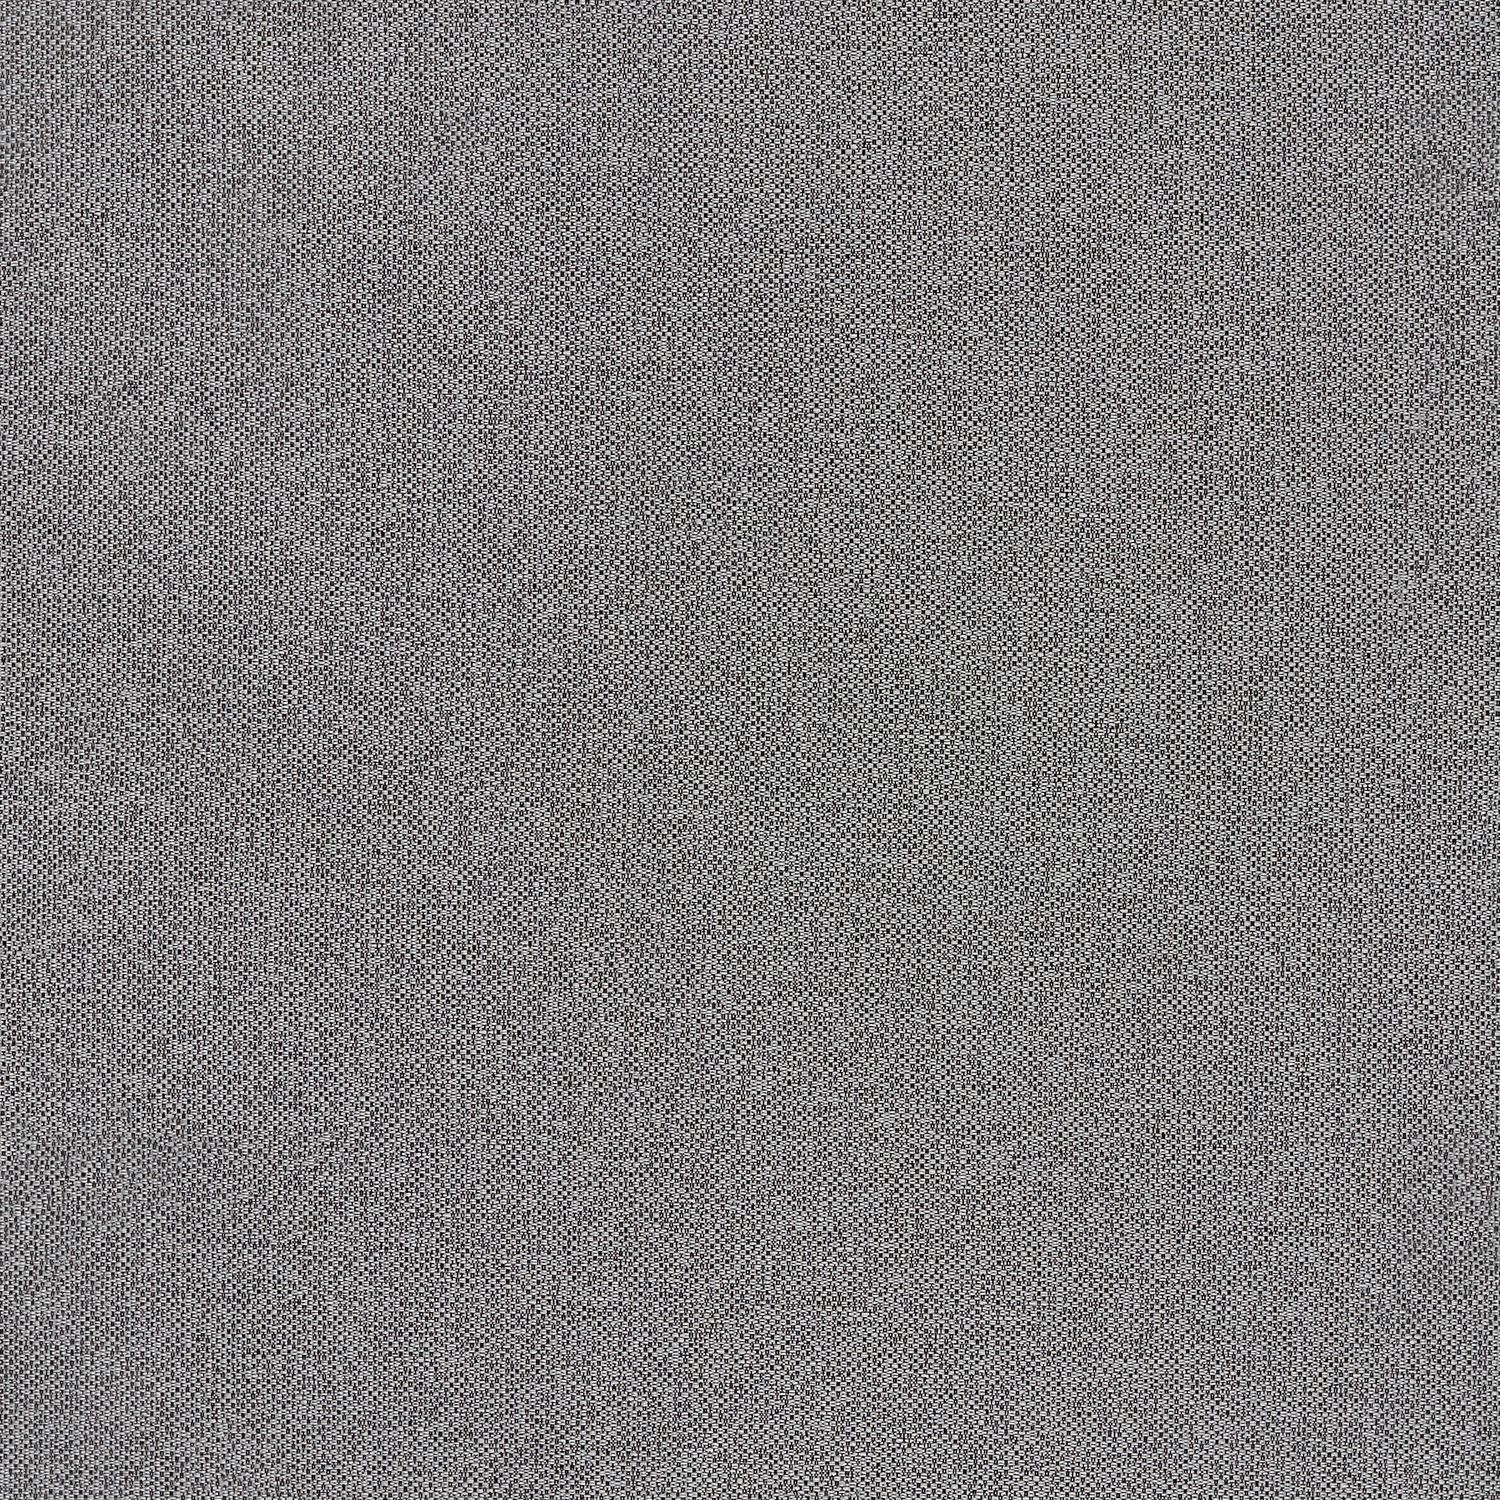 Fleck Forge - Anvil - 7016 - 06 - Half Yard Tileable Swatches